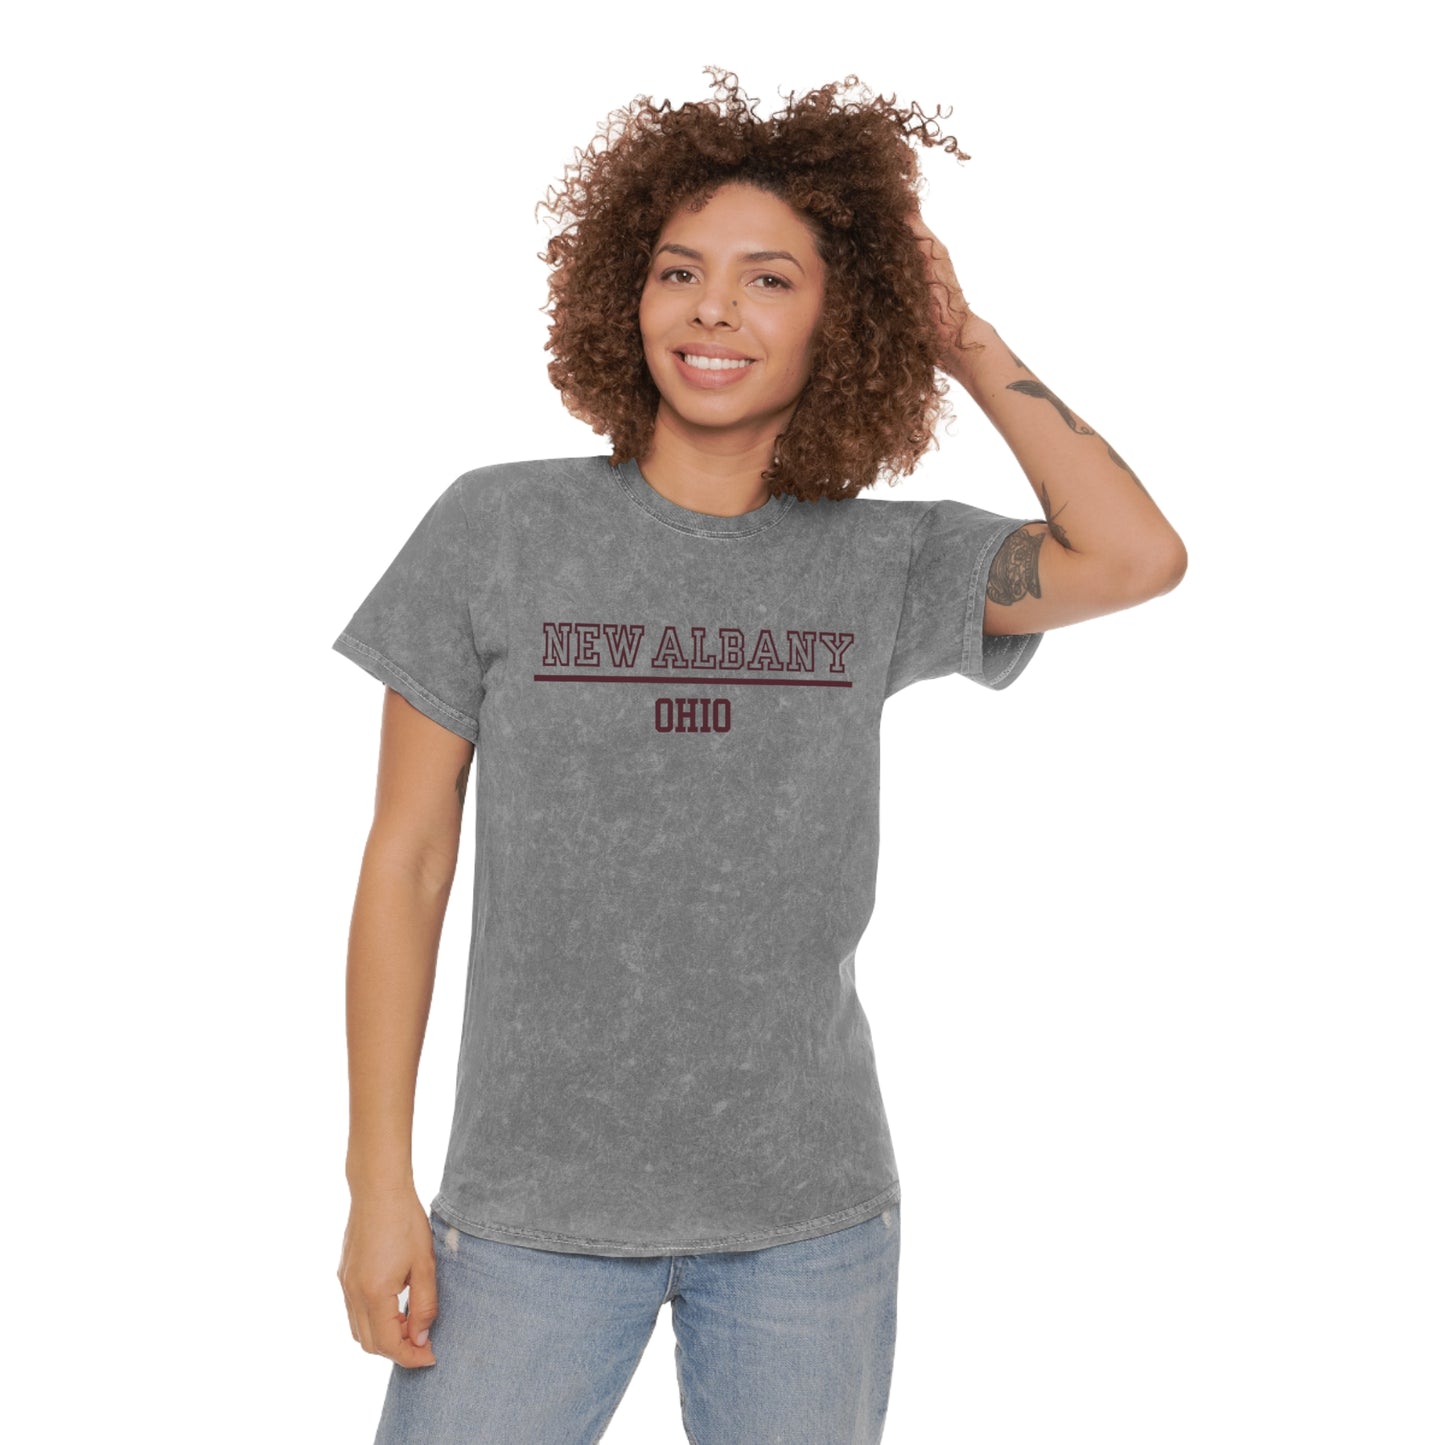 Adult Unisex City State Mineral Wash Short Sleeve Graphic Tee - New Albany